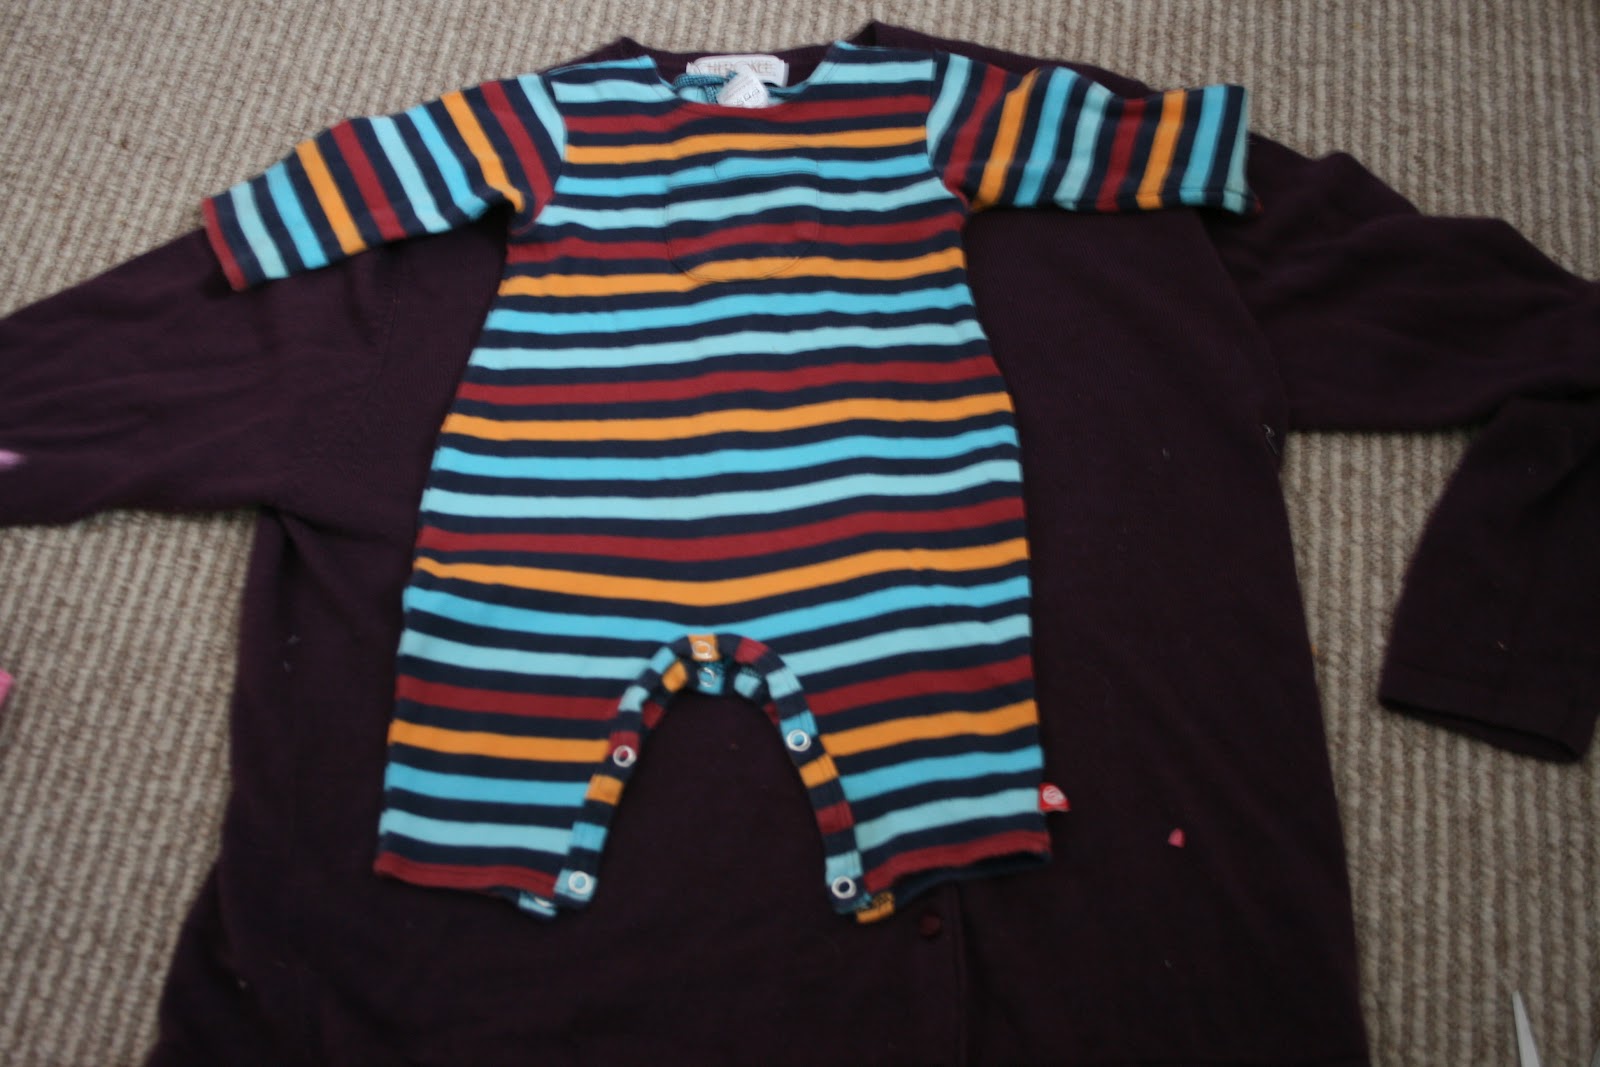 a sweater suit for baby from an old cardigan | June Cleaver in yoga pants